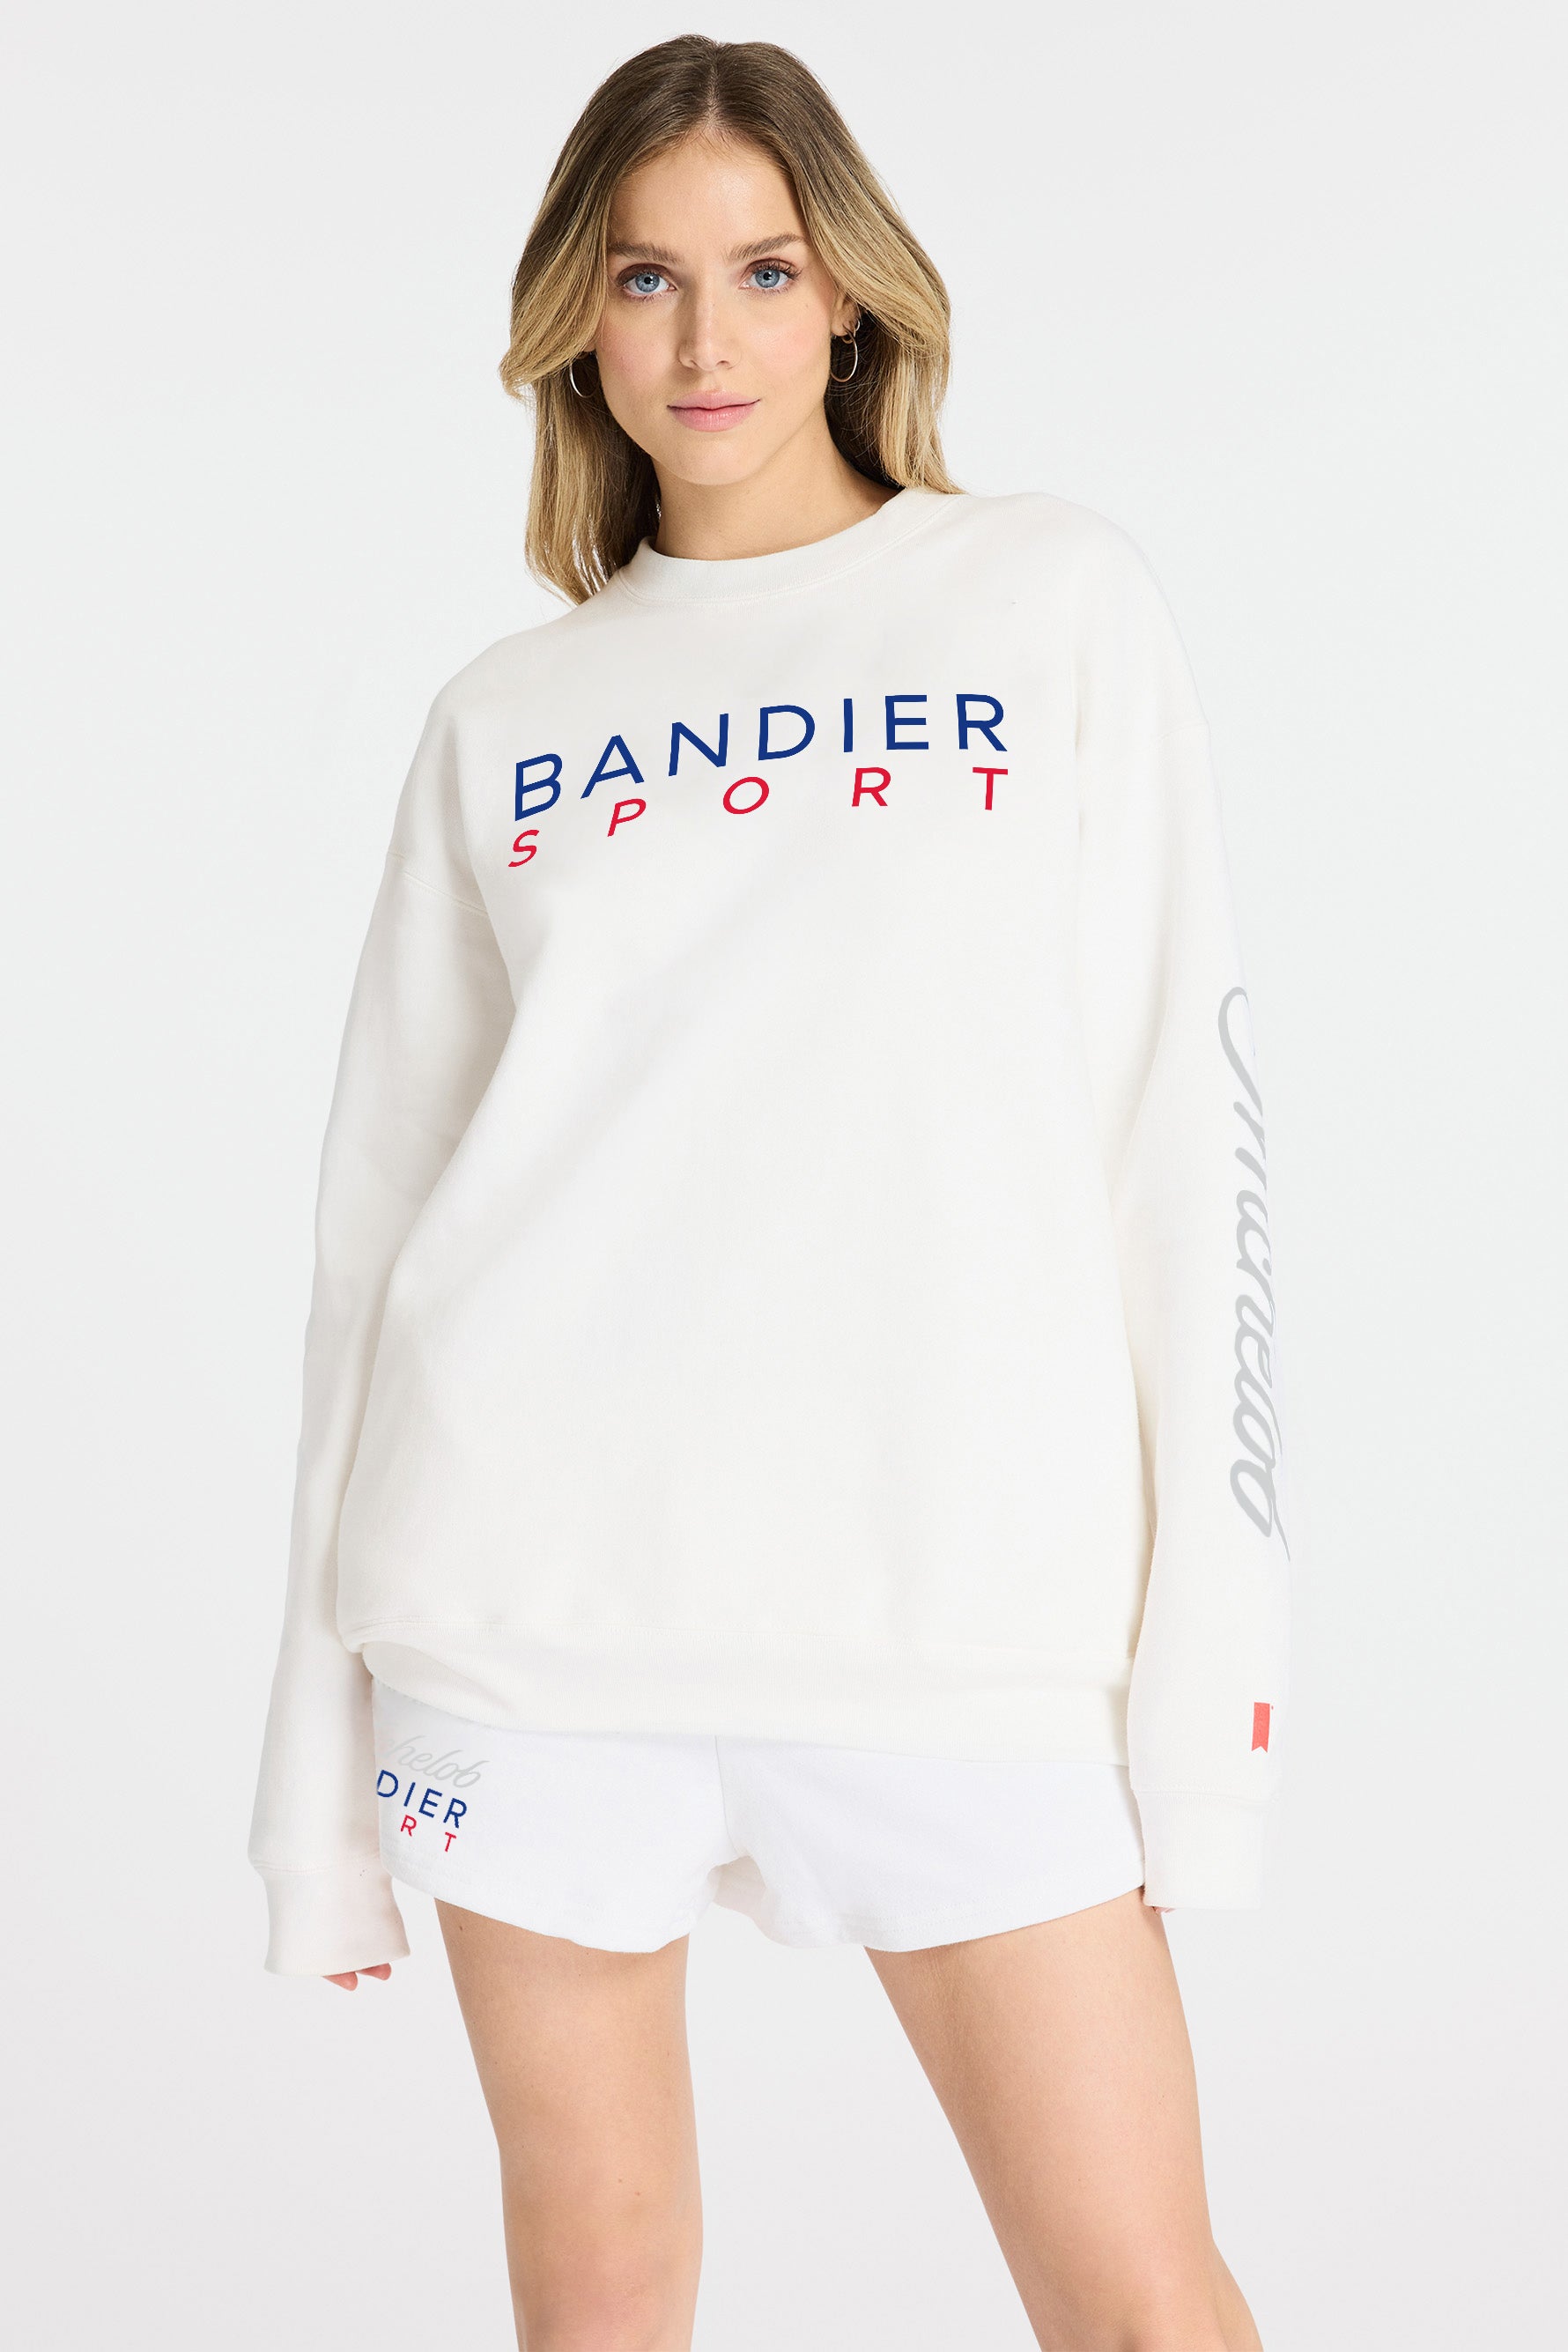 Front view of model wearing Michelob ULTRA x BANDIER Sweatshirt, "Bandier Sport" across the chest, "Michelob" on left sleeve.